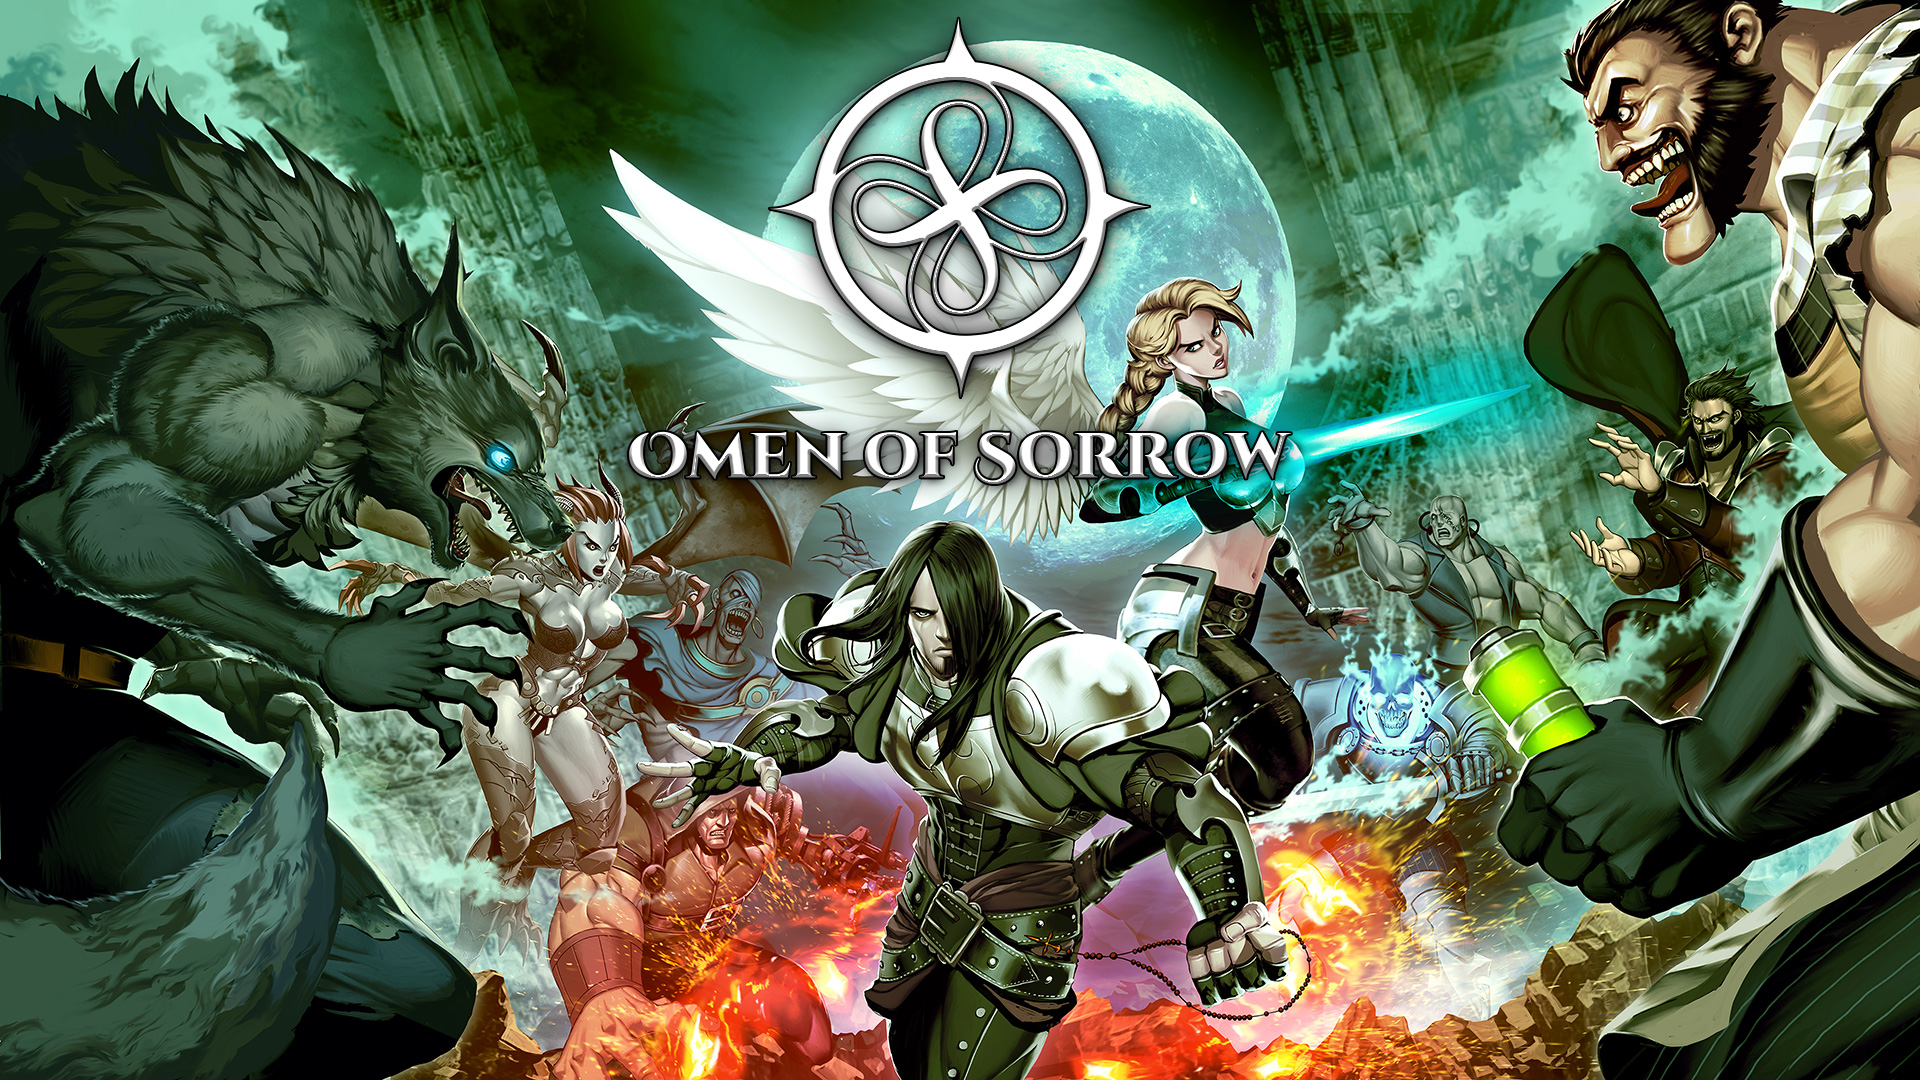 Omen of Sorrow's key art, featuring characters and the game's logo.